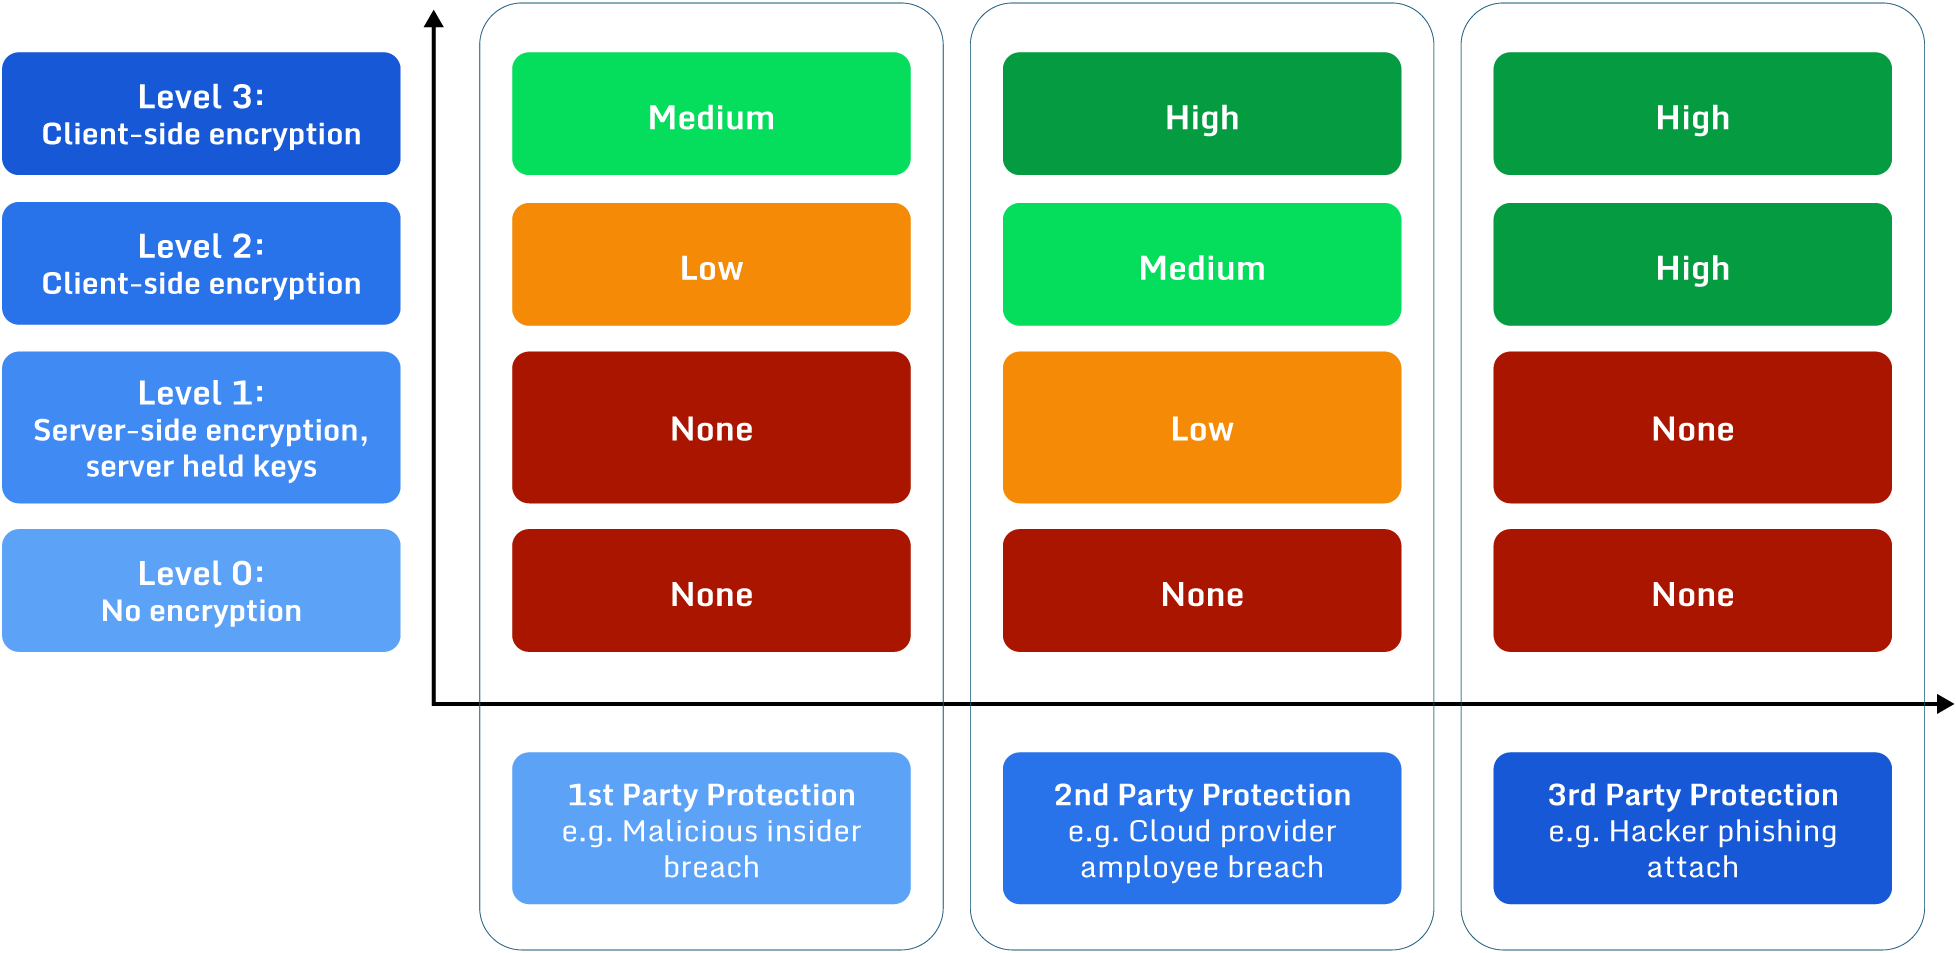 An overview of the protection provided by different encryption types against various access control breaches